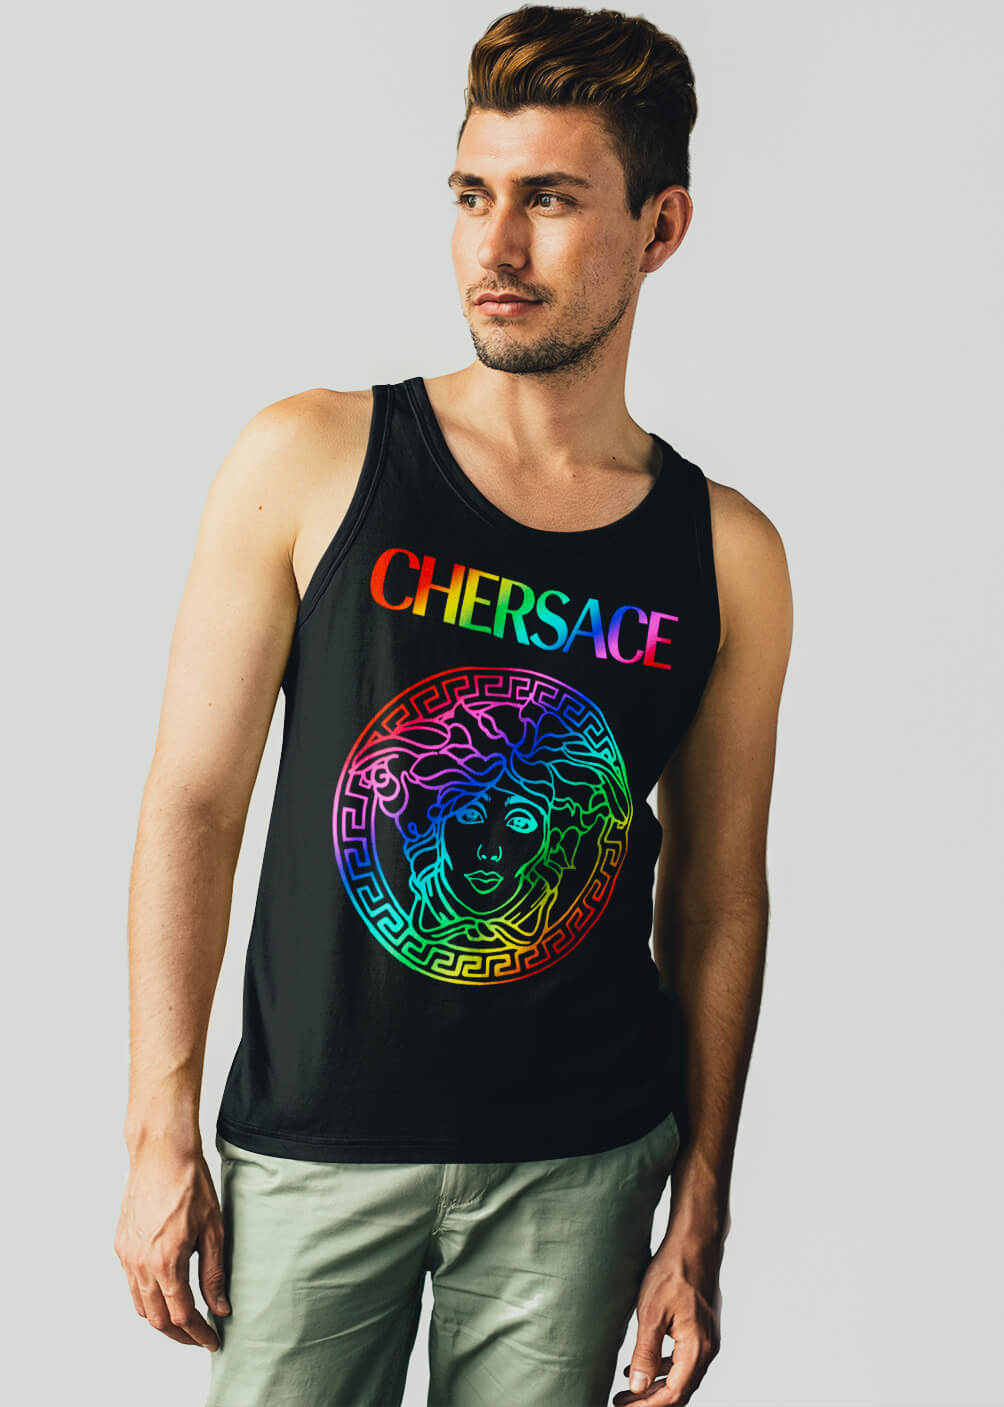 CHERSACE by Gllamazon tank top in a guy standing in front of a white wall